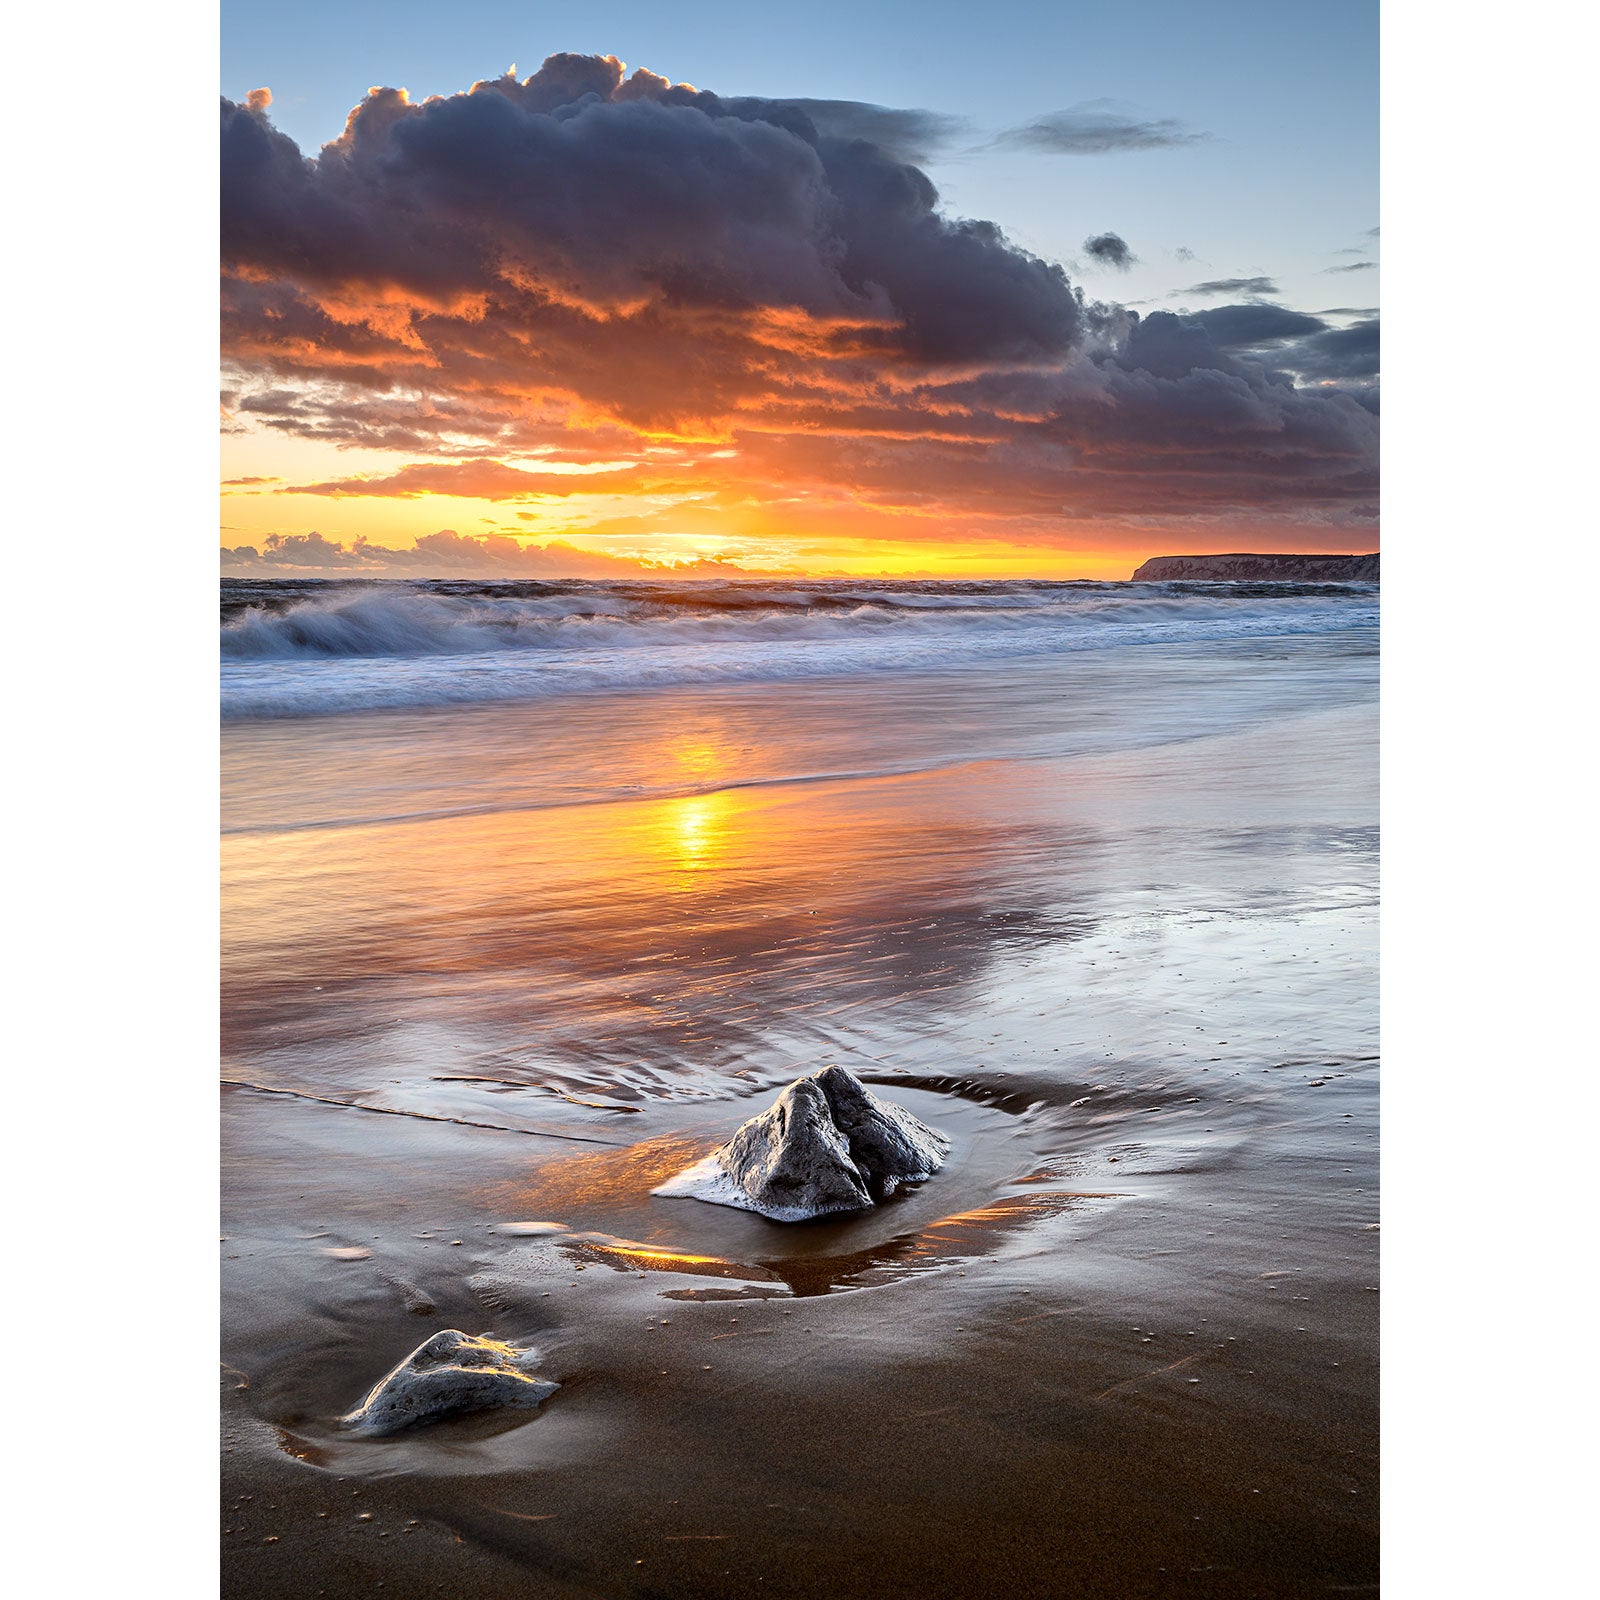 Sunset at a beach with waves and reflective wet sand, featuring rocks in the foreground named Brook Bay by Available Light Photography.